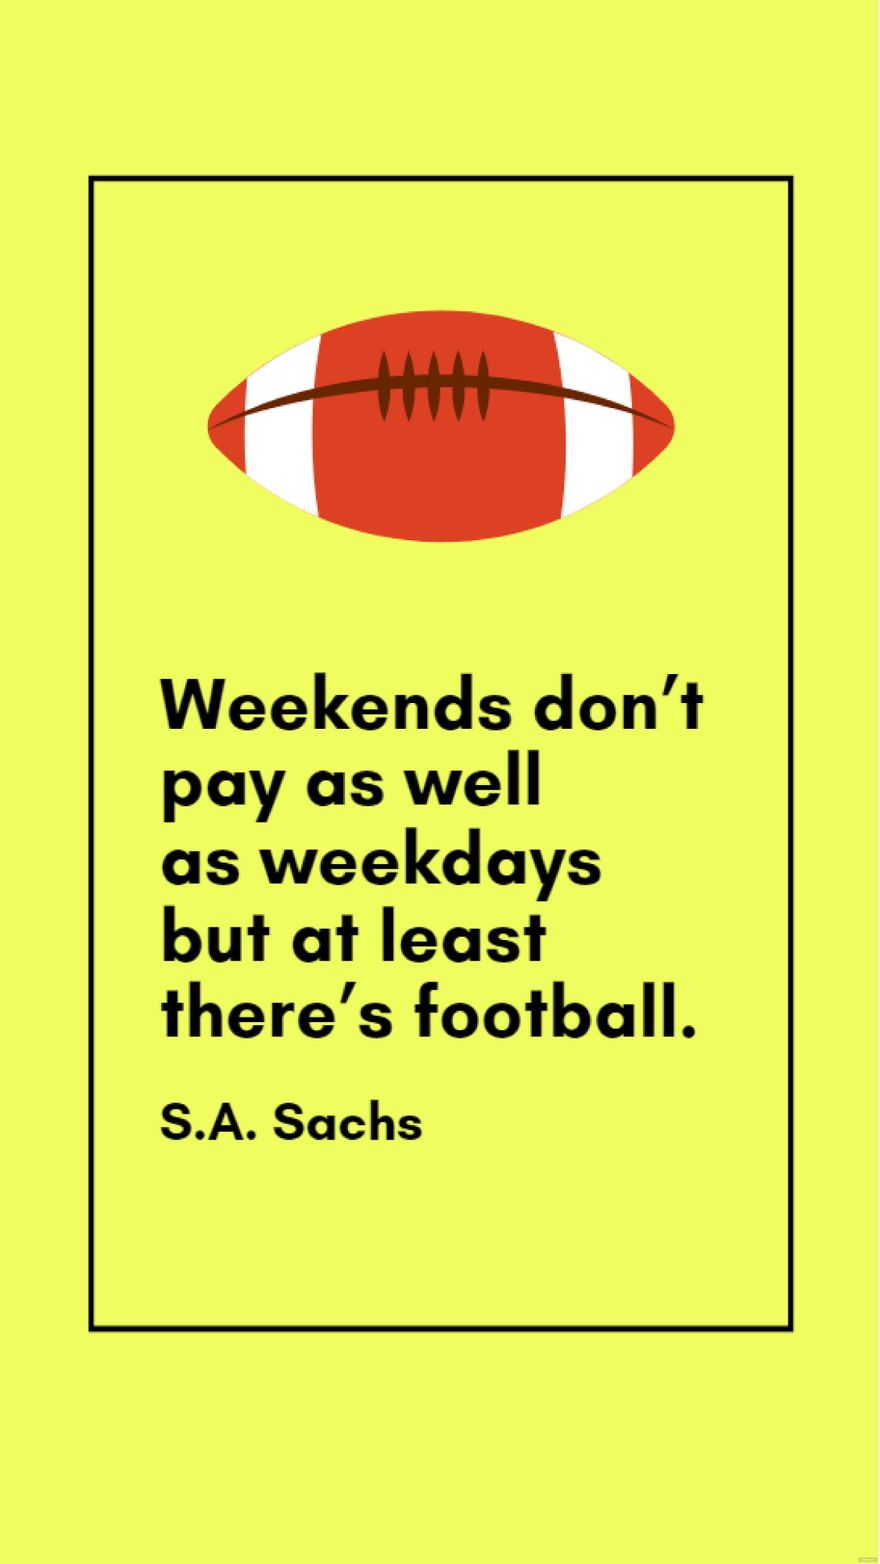 S.A. Sachs - Weekends don’t pay as well as weekdays but at least there’s football. in JPG